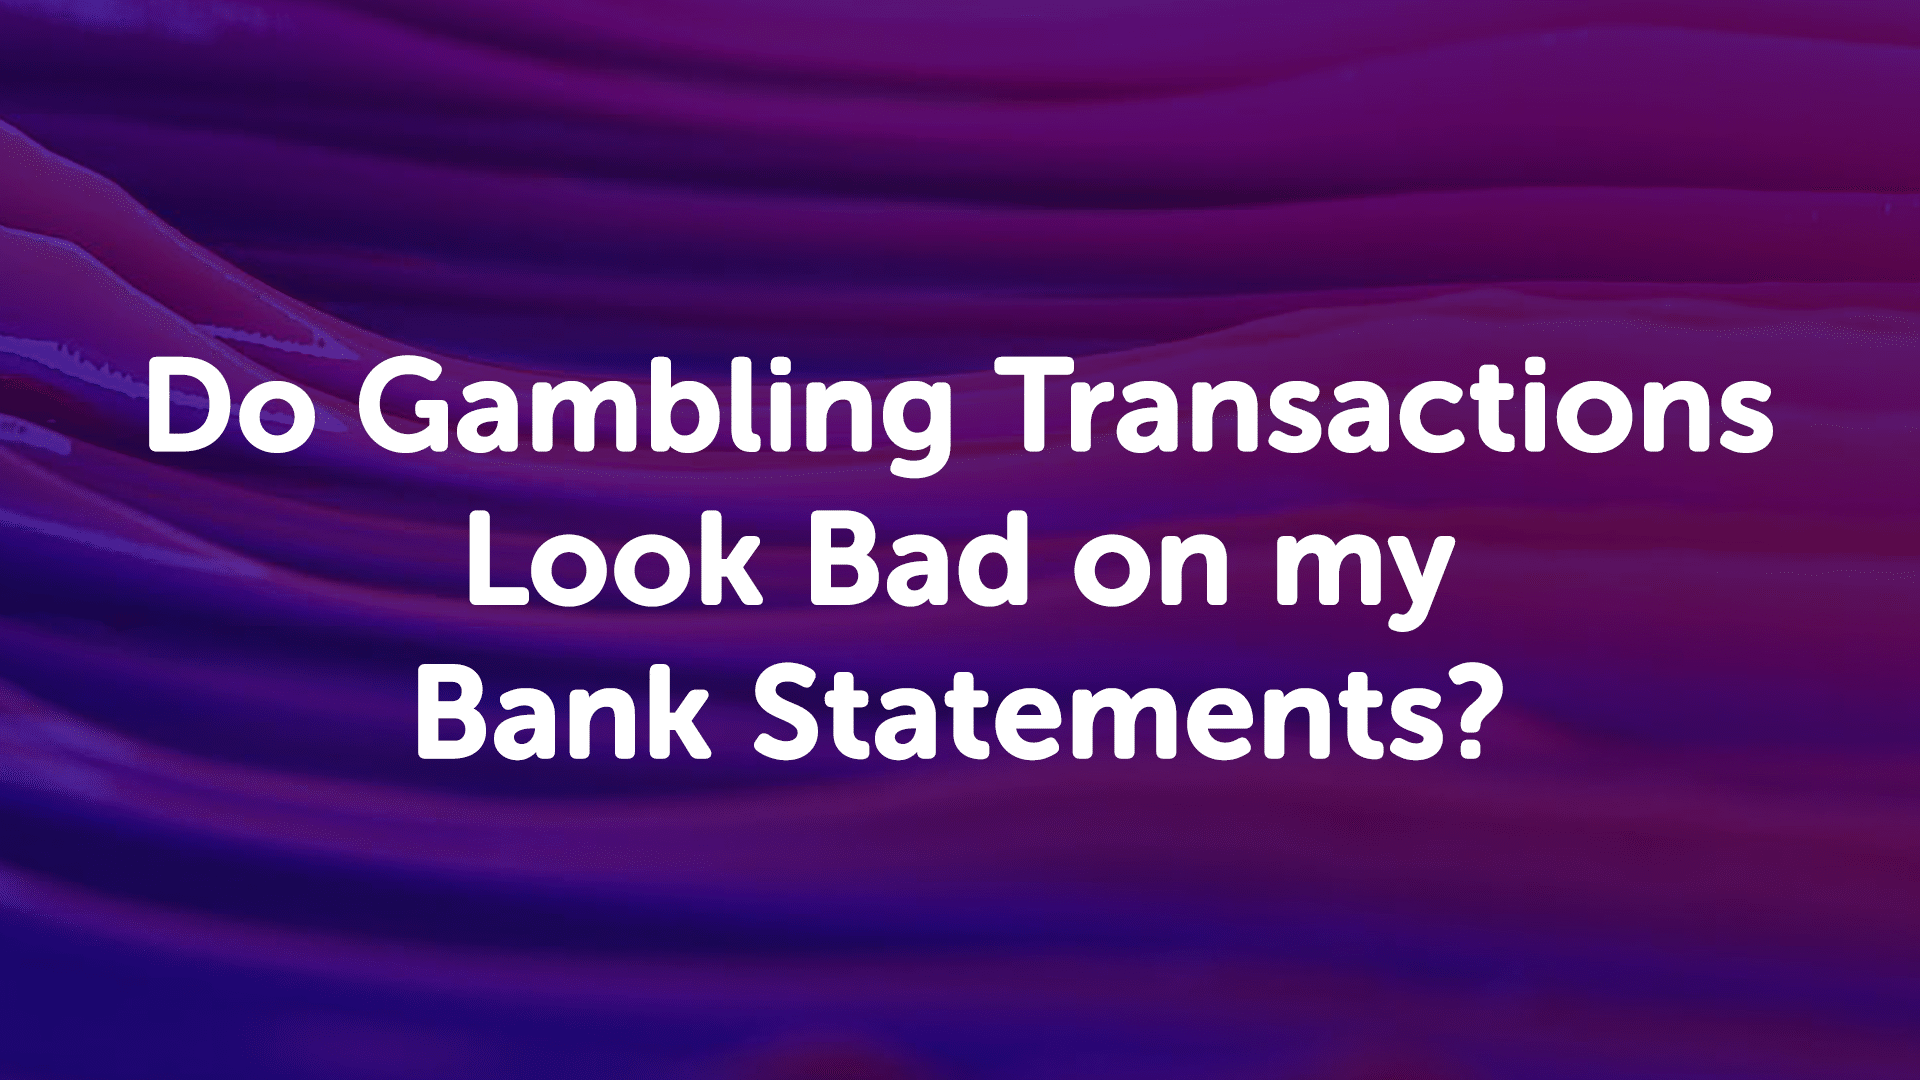 Do Gambling Transactions Look Bad on My Bank Statements?